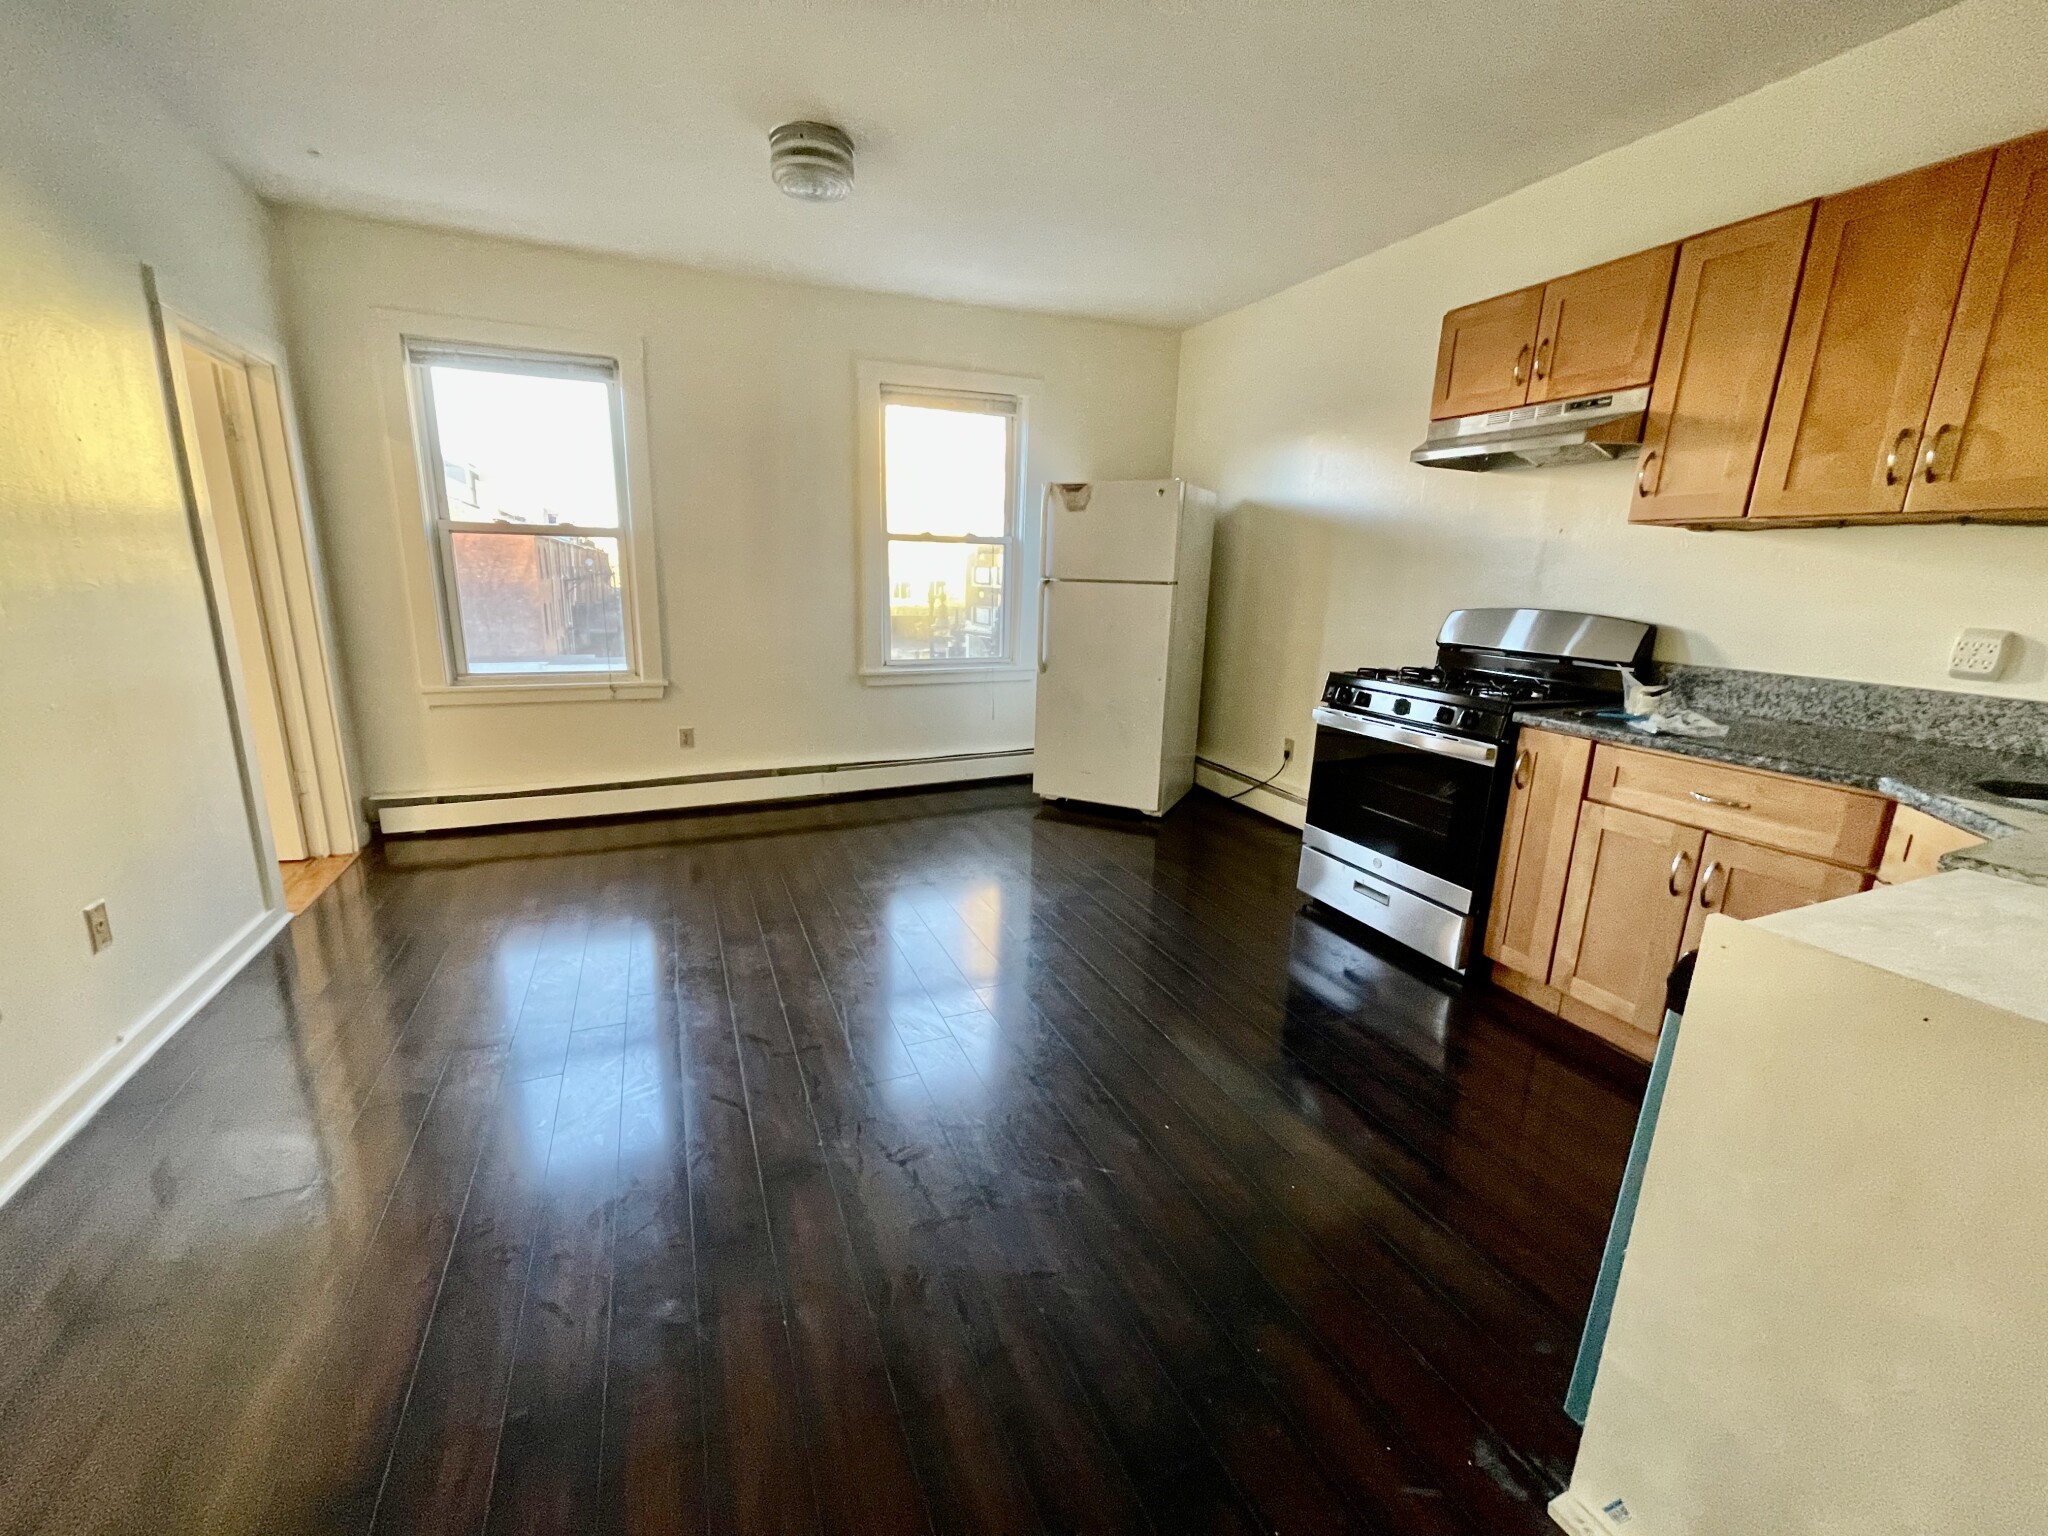 Photos of apartment on Fisher Ave.,Boston MA 02120